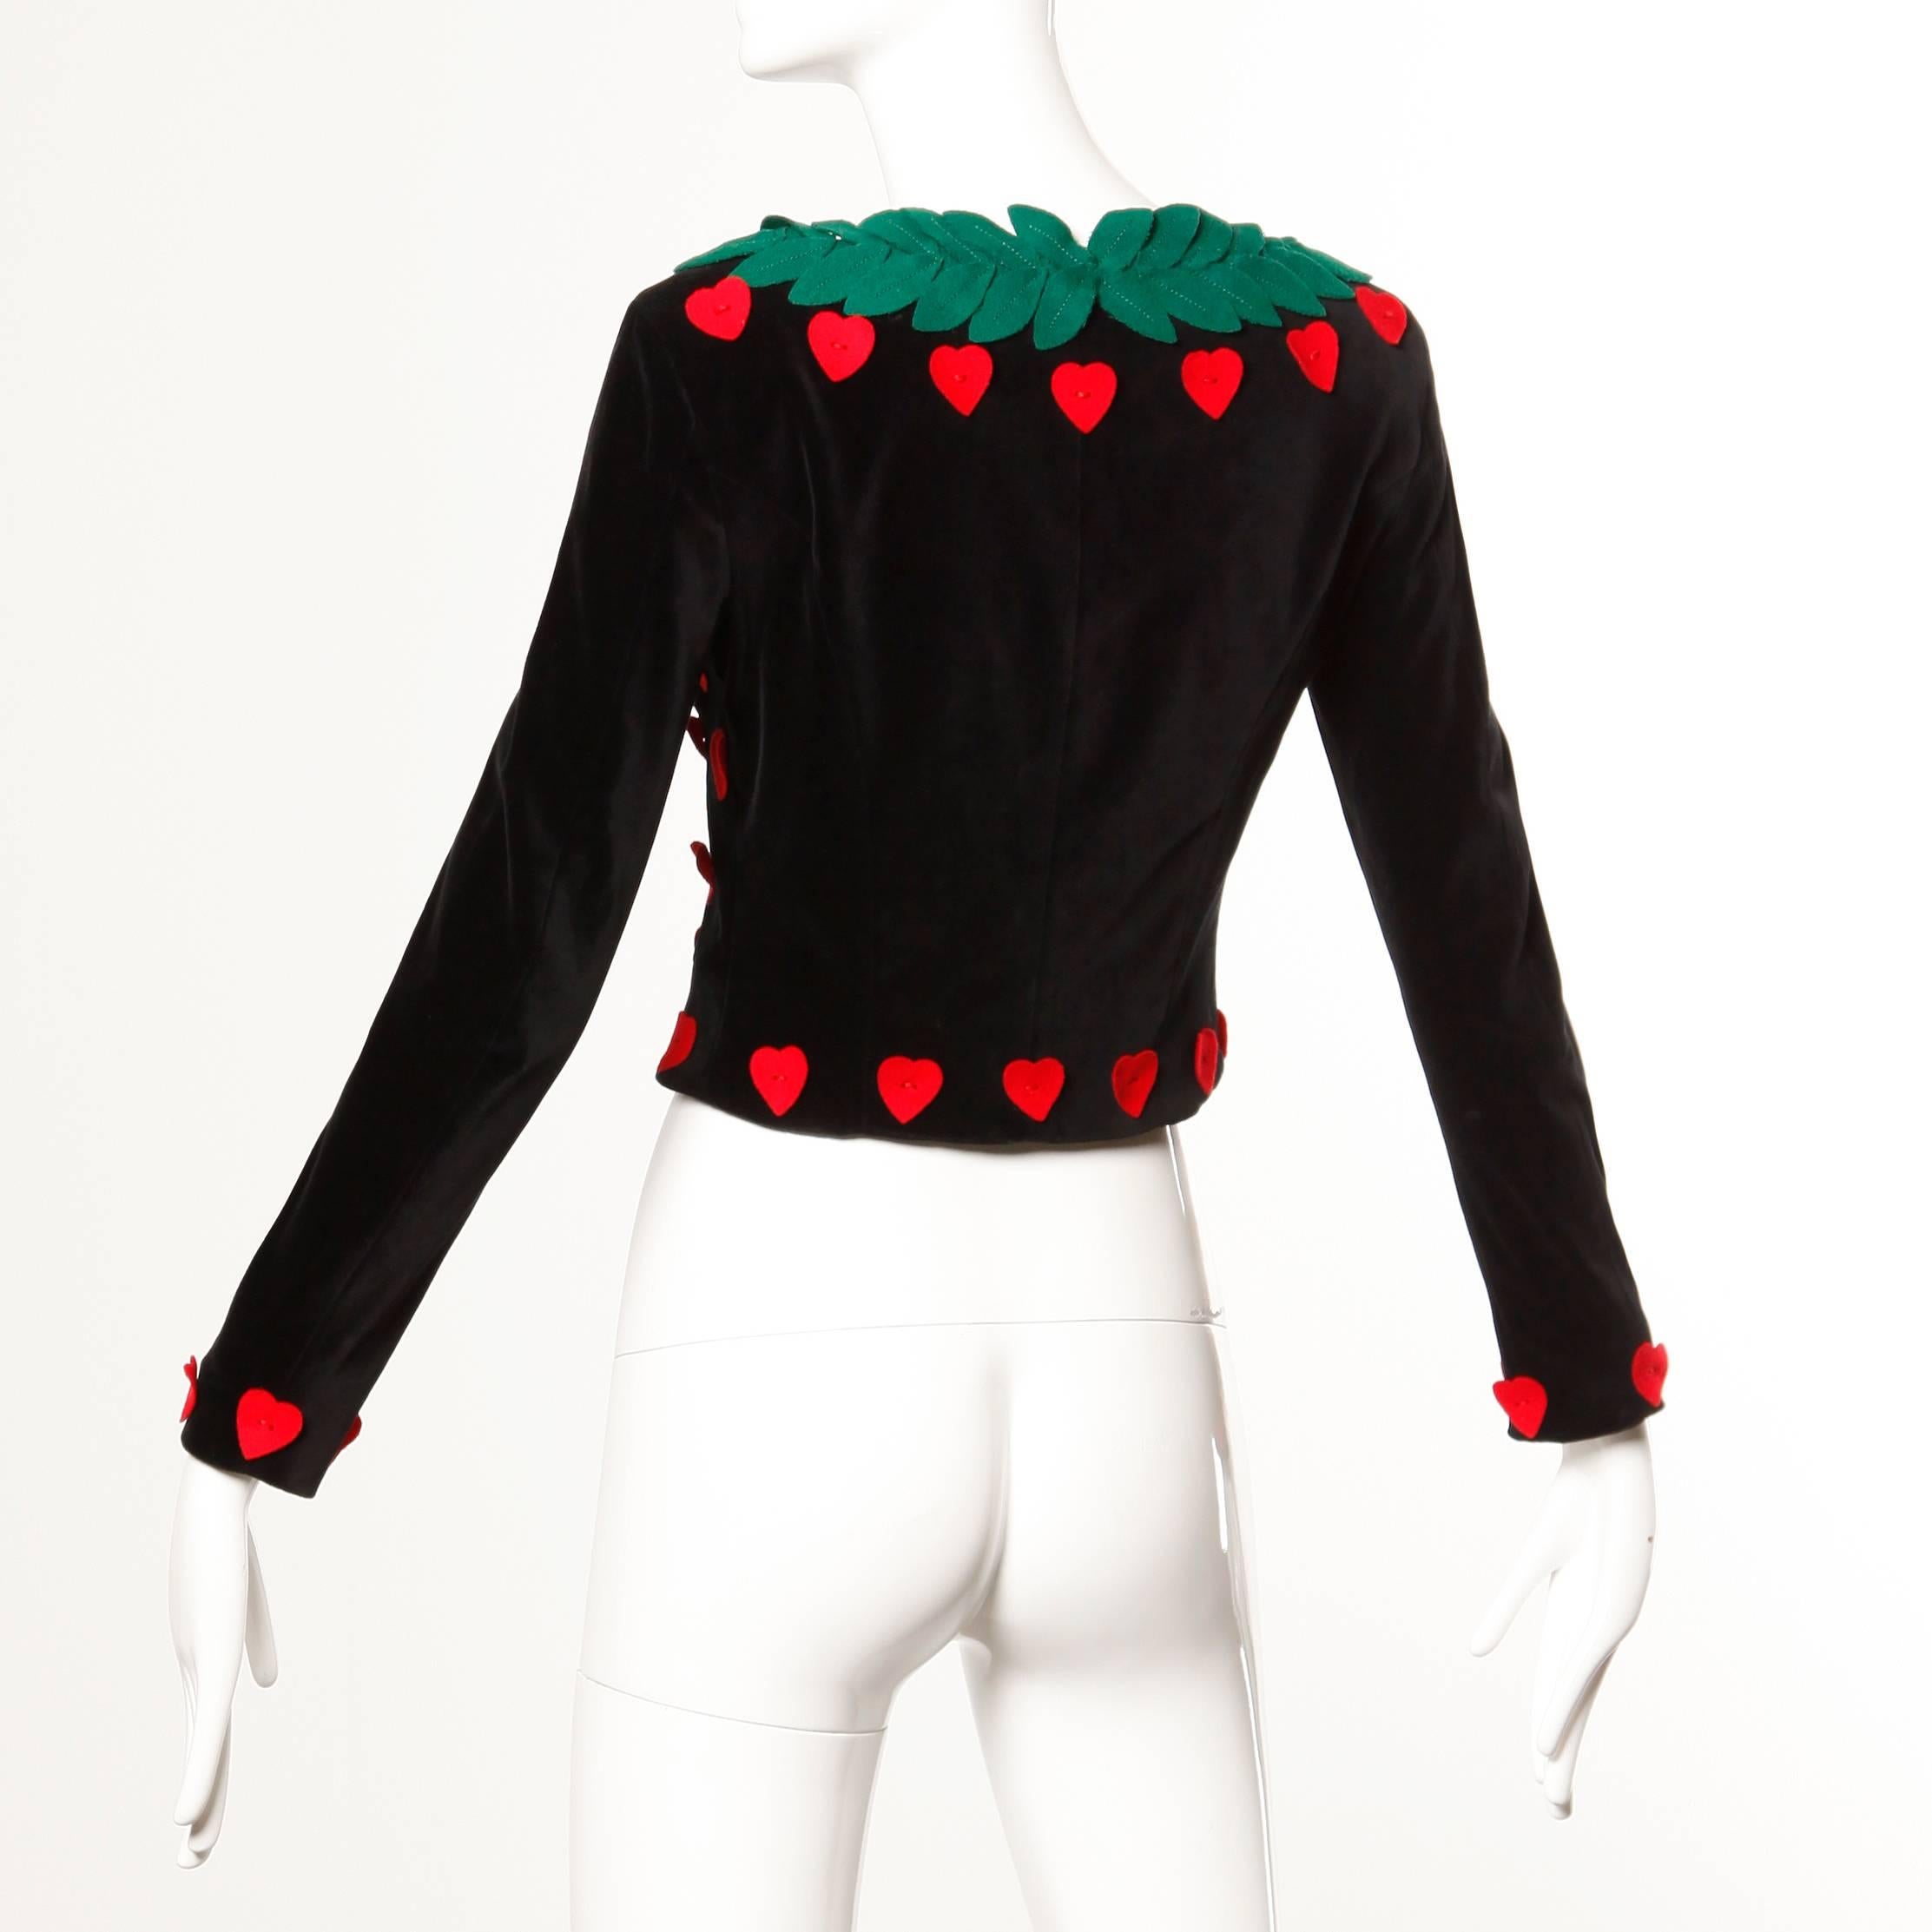 Women's Franco Moschino Vintage Velvet Heart Jacket as Worn by Miley Cyrus, 1990s 